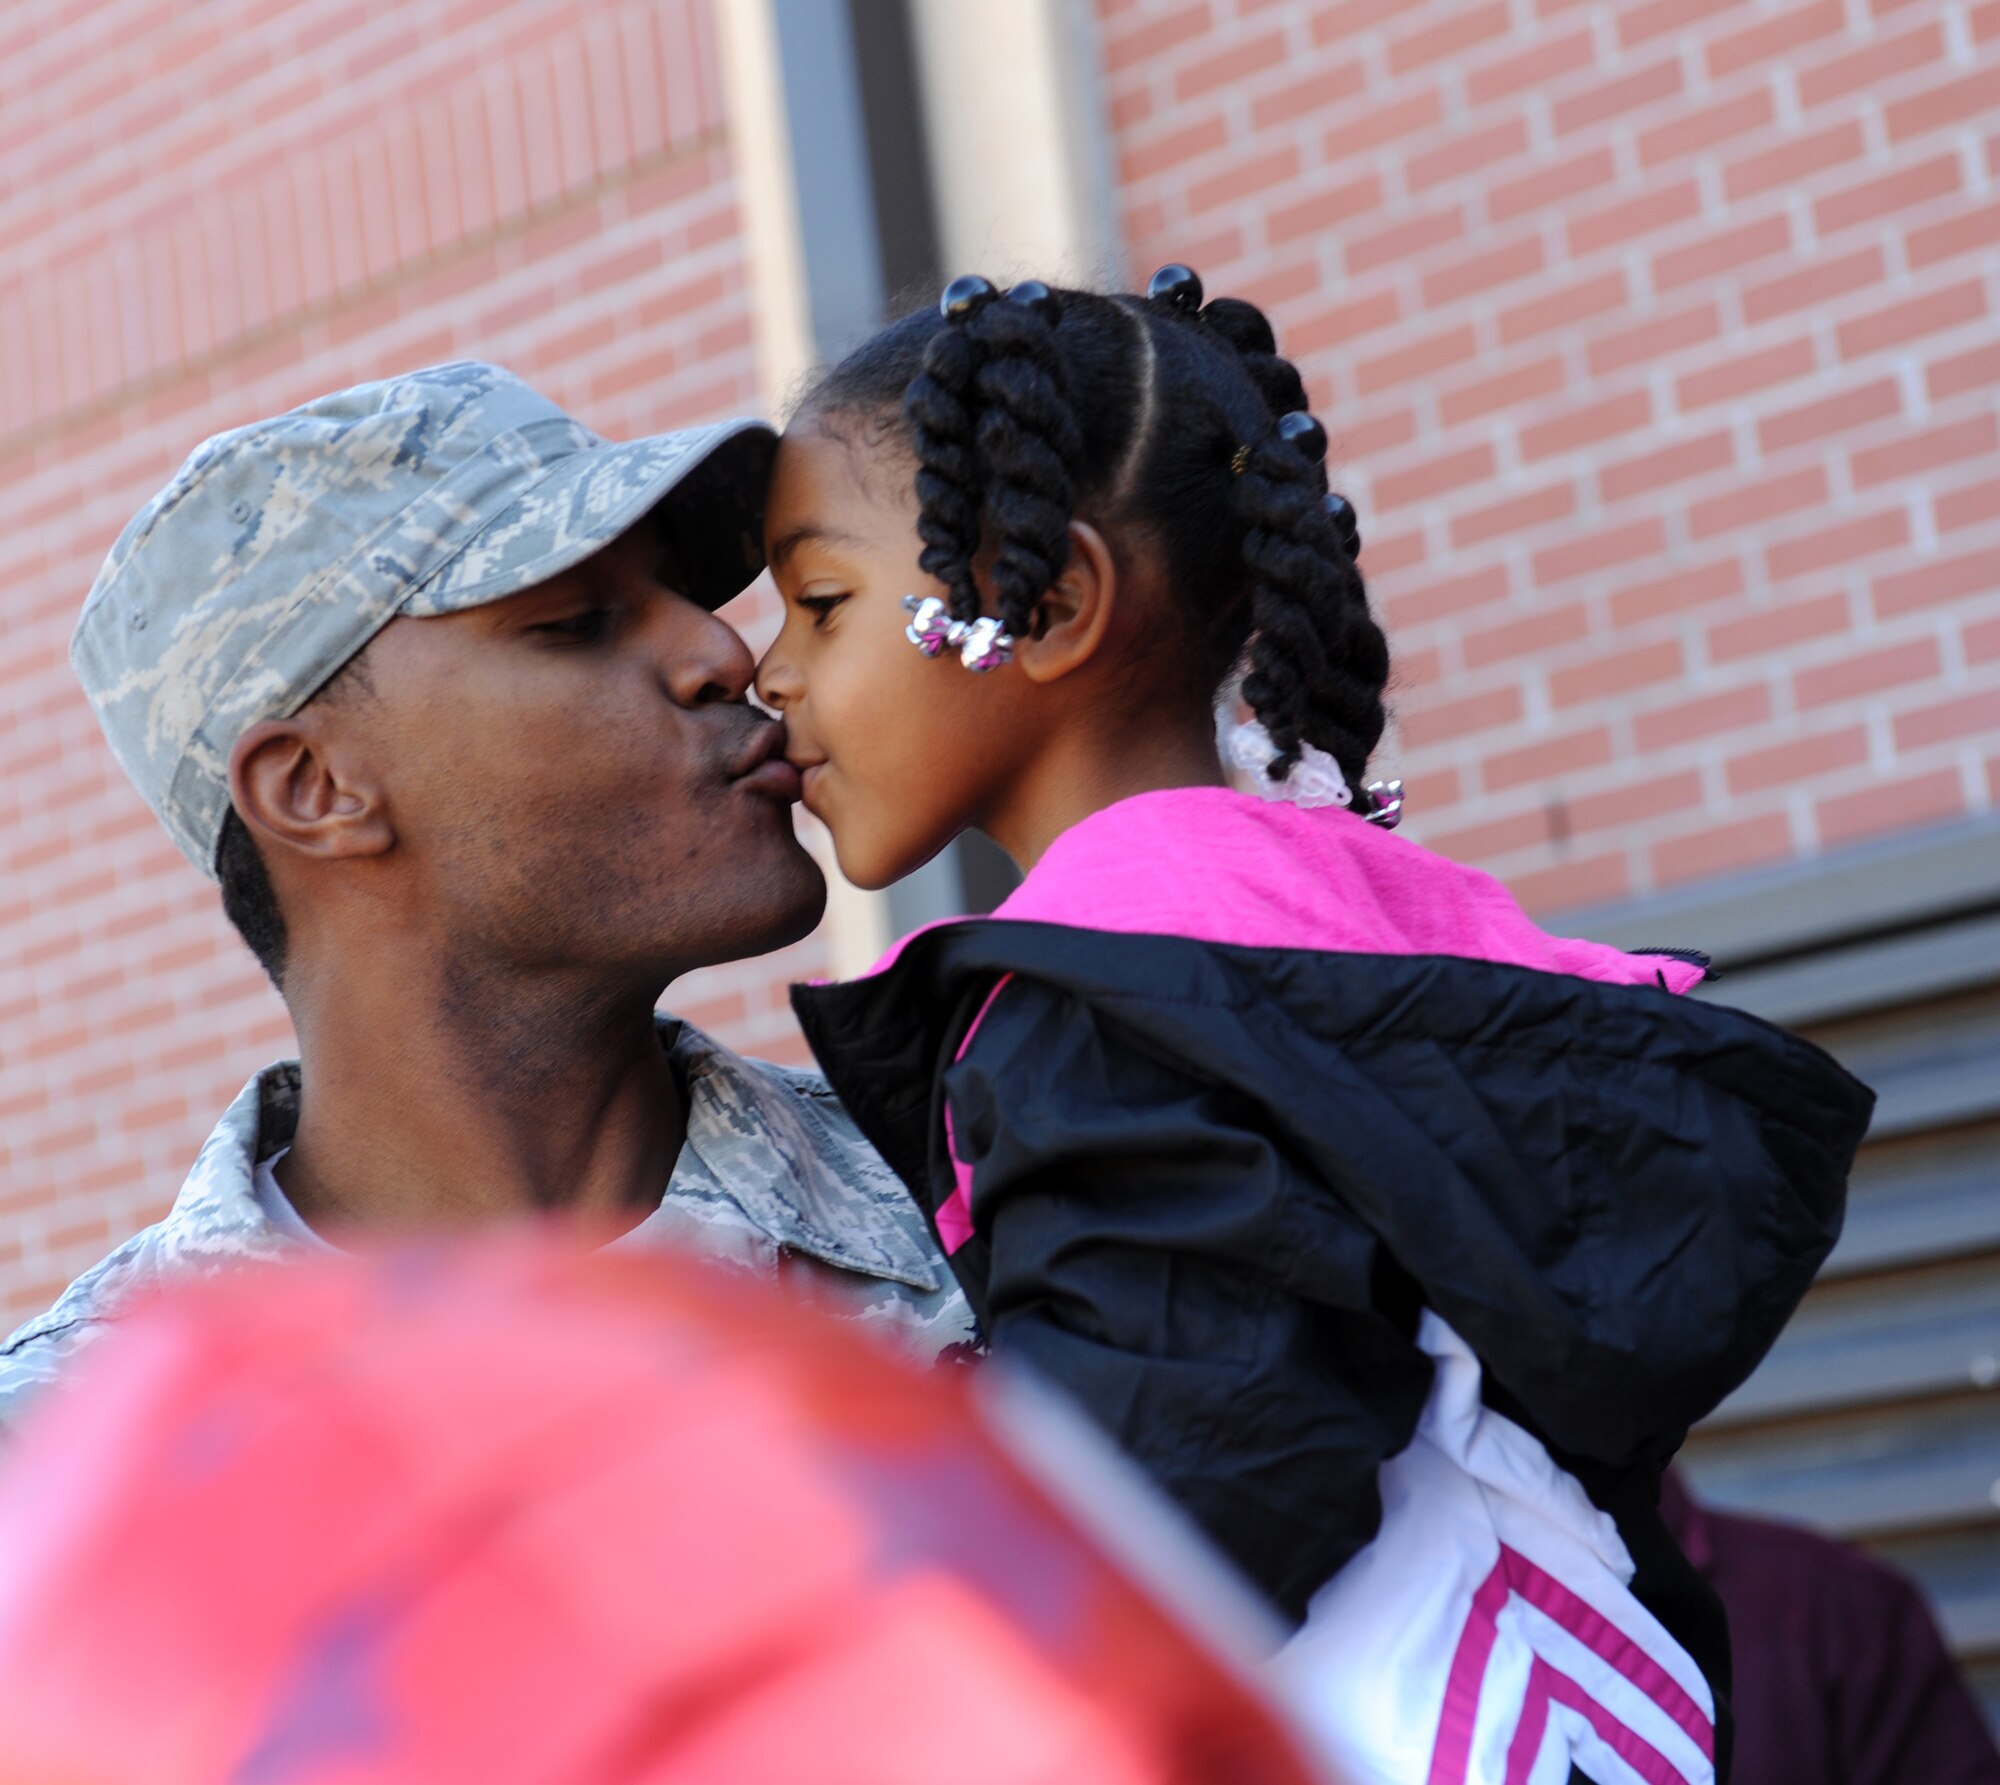 MOODY AIR FORCE BASE, Ga. -- Tech. Sgt. Alvin Dyer, 23rd Civil Engineering Squadron heating, ventilation and air conditioning NCO in-charge, gives his daughter, Cassidy, a kiss after he was  promoted to master sergeant under the Stripes for Exceptional Performers program here Dec. 29. Each fiscal year, a limited number of enlisted Air Force personnel with exceptional potential may be promoted to the grades of staff sergeant through master sergeant under the STEP program. (U.S. Air Force photo by Airman 1st Class Benjamin Wiseman)